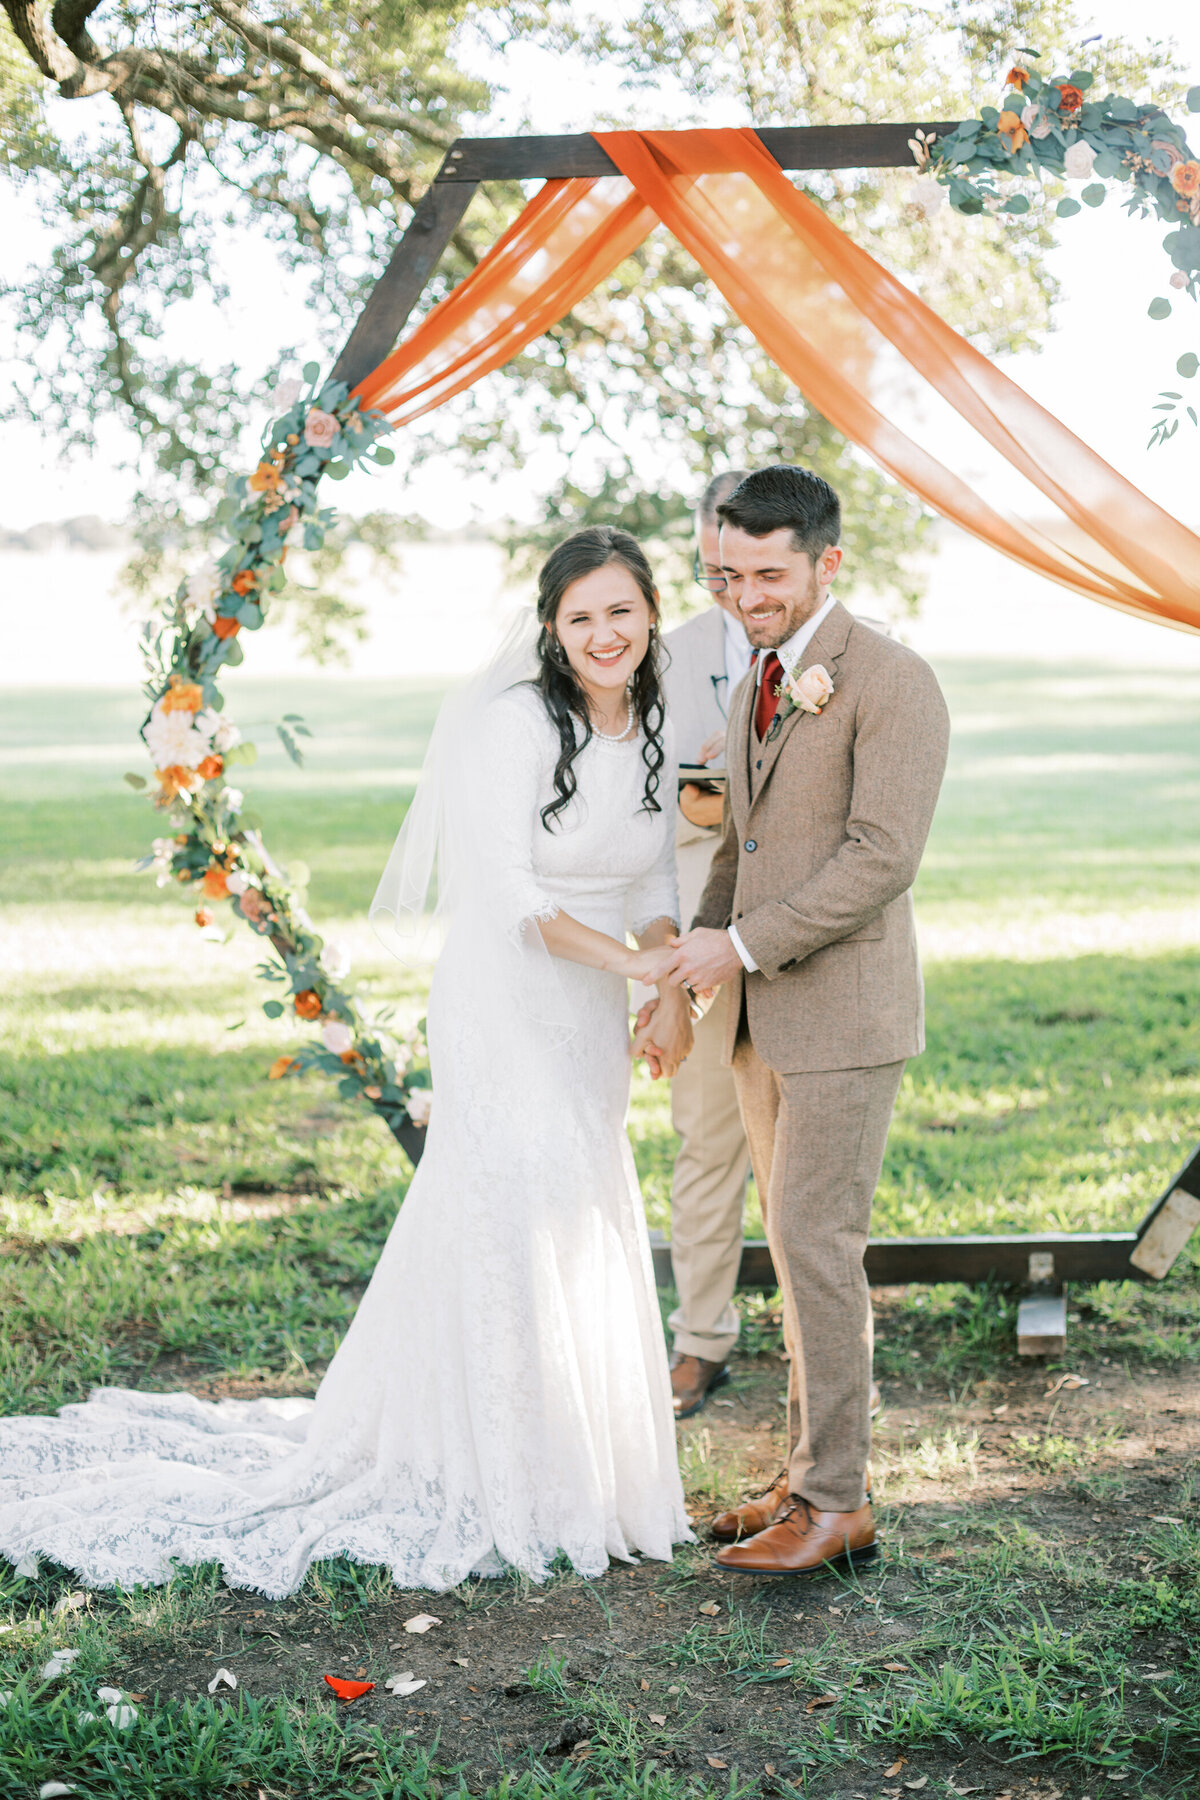 Ink & Willow Photography | Meet Our Photographers | Wedding and Lifestyle Photographers | Victoria TX